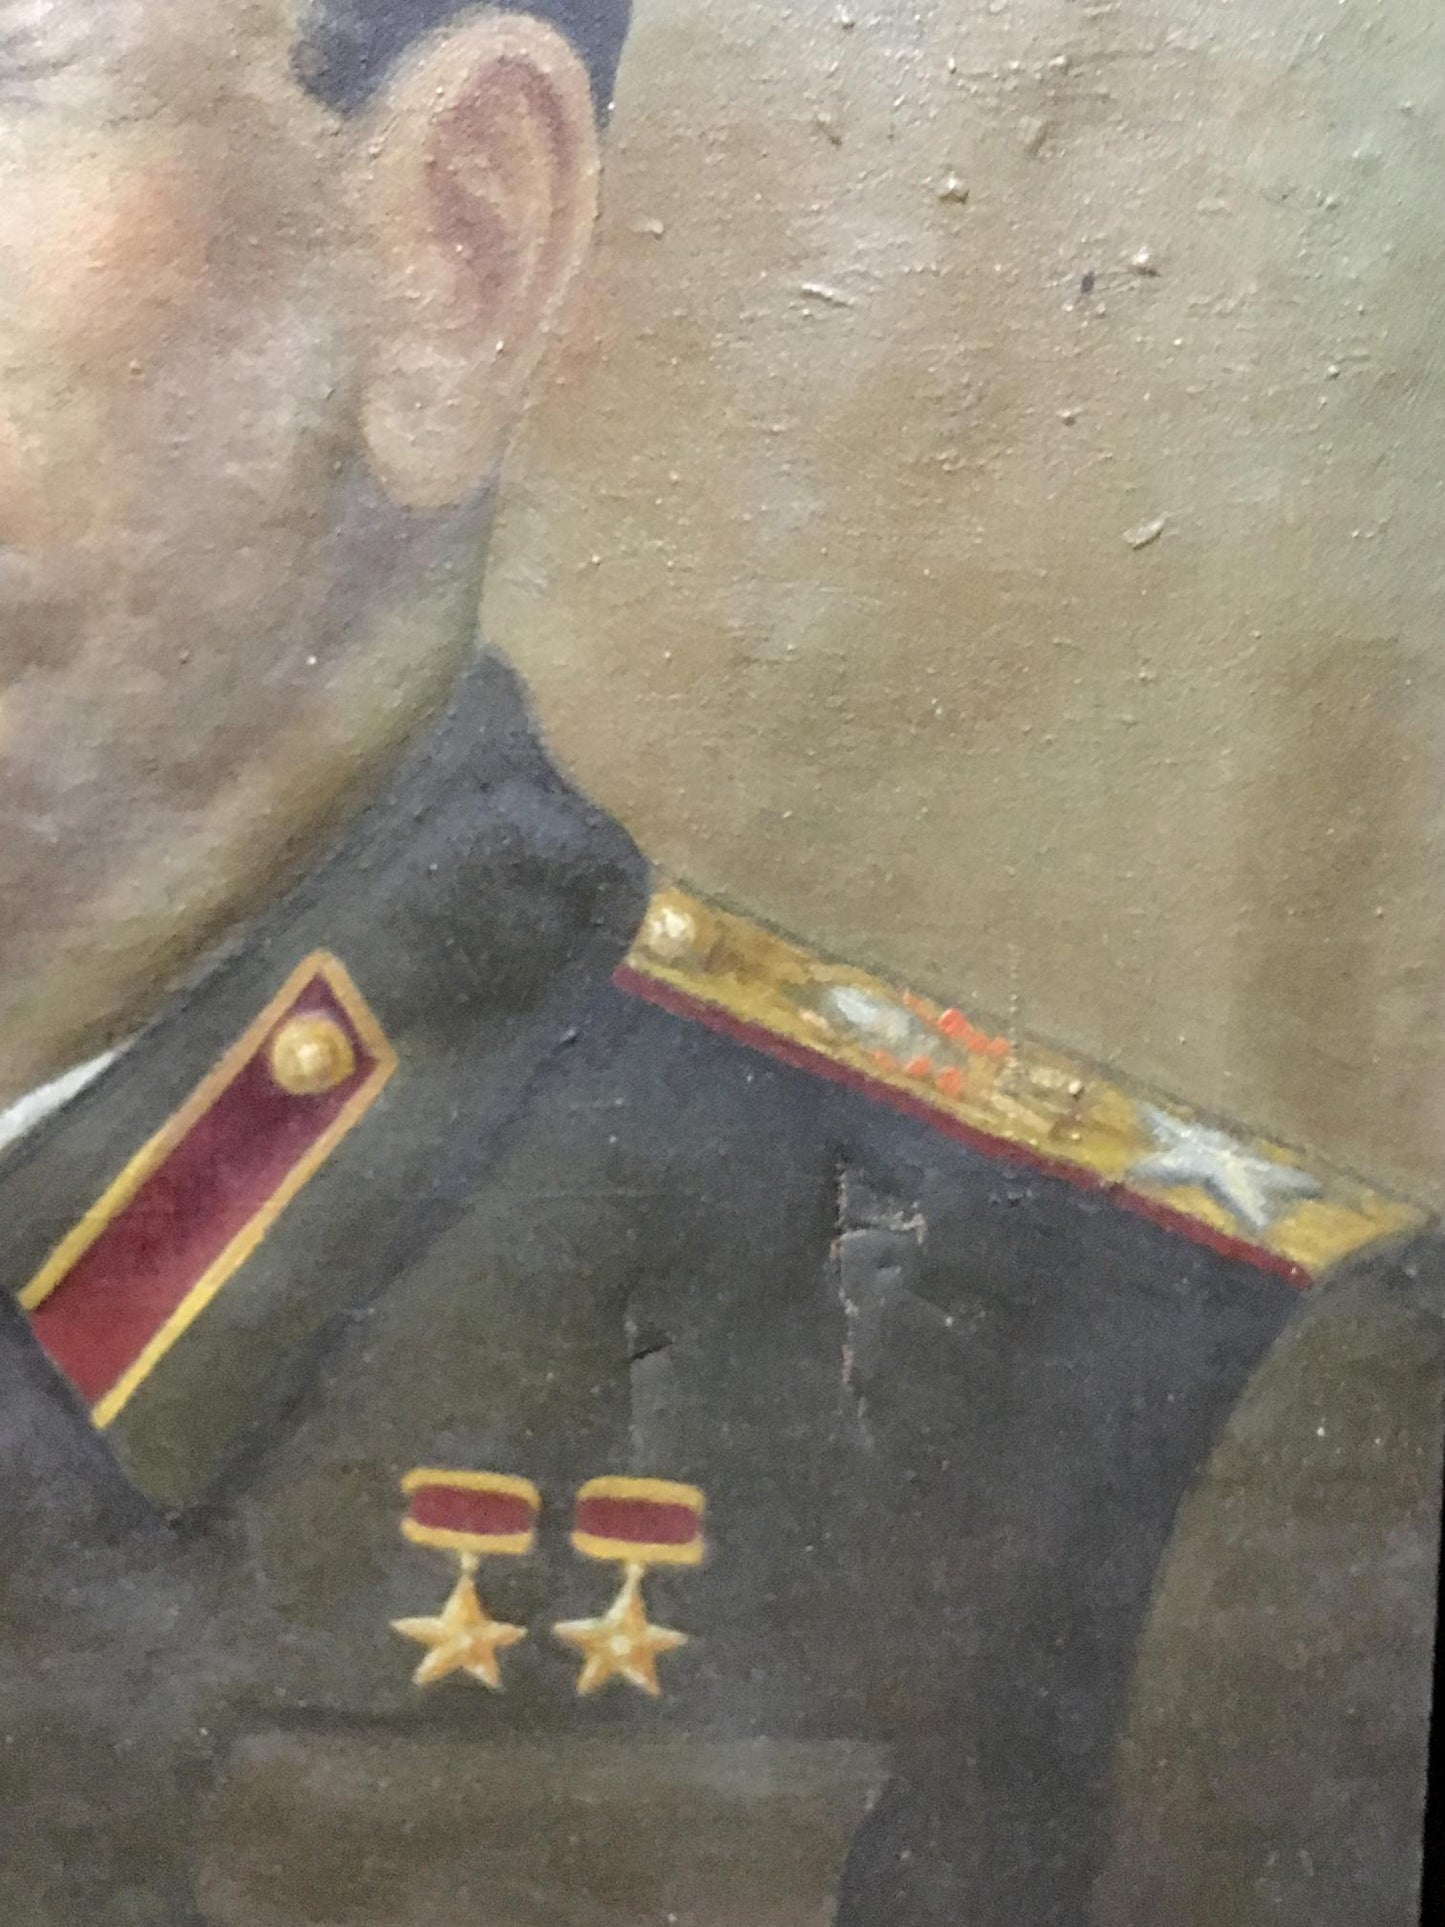 Oil painting Old real portrait of Stalin